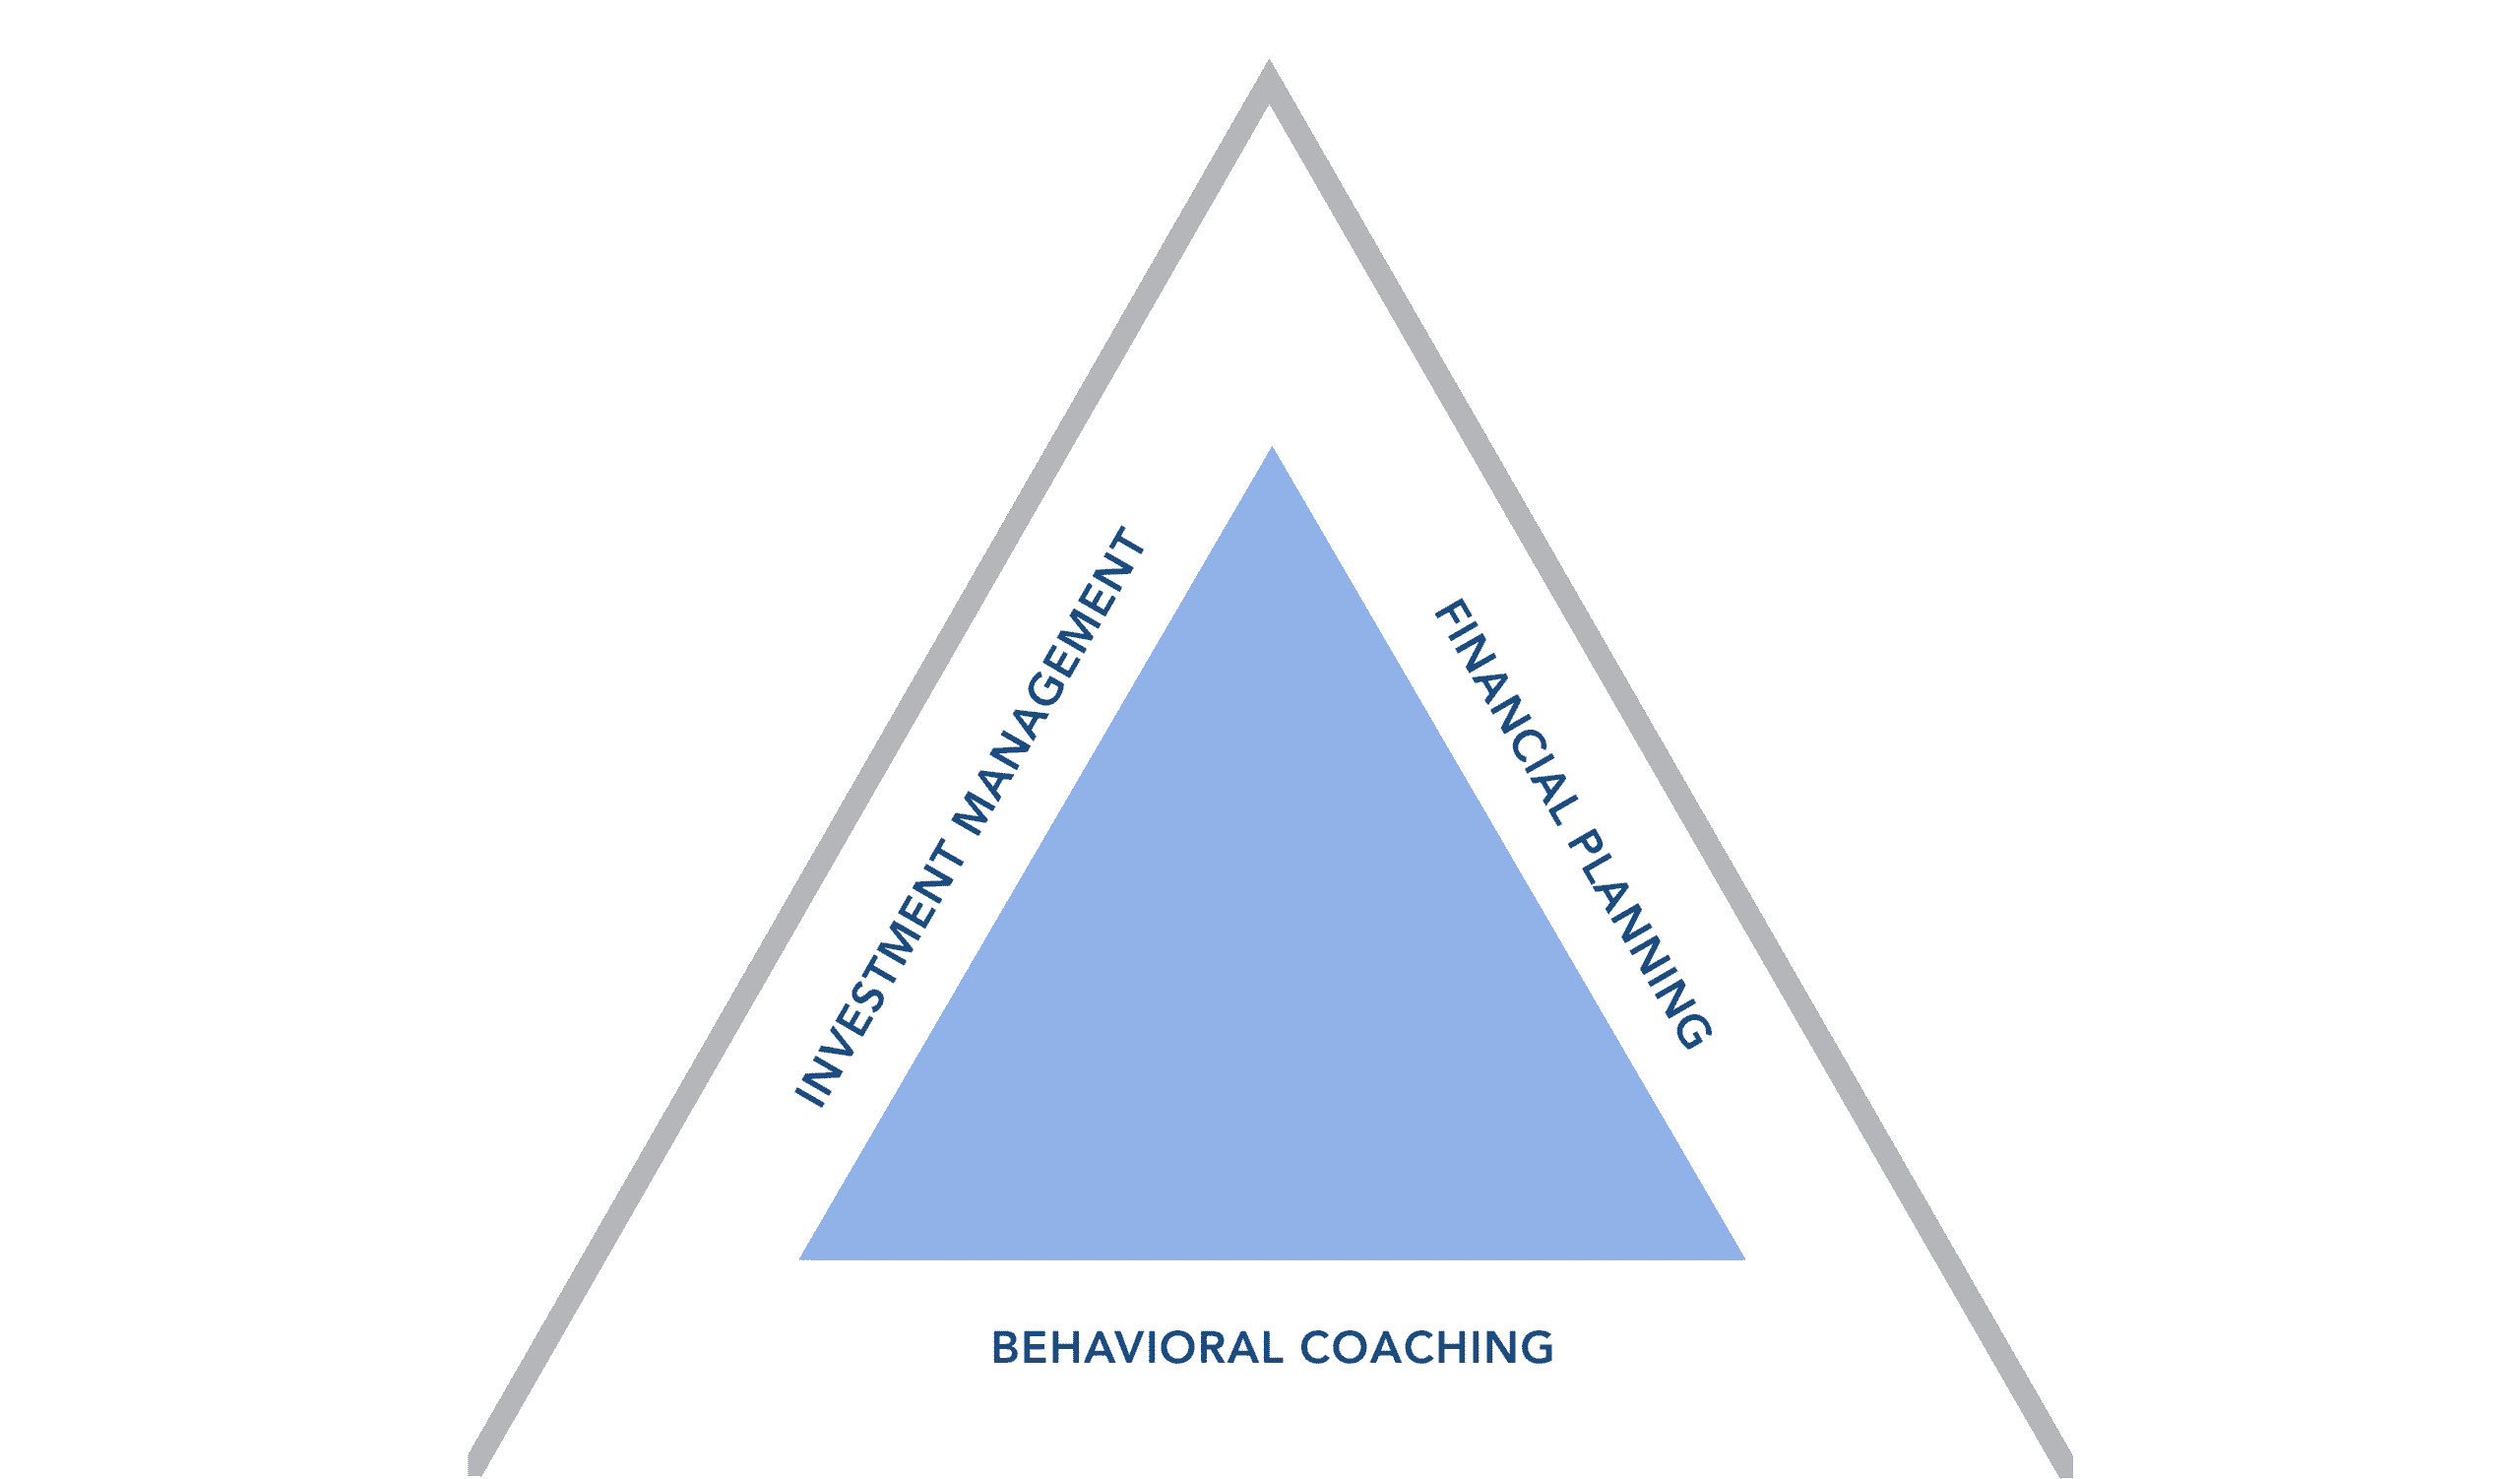 Investment Management - Financial Planning - Behavioral Coaching